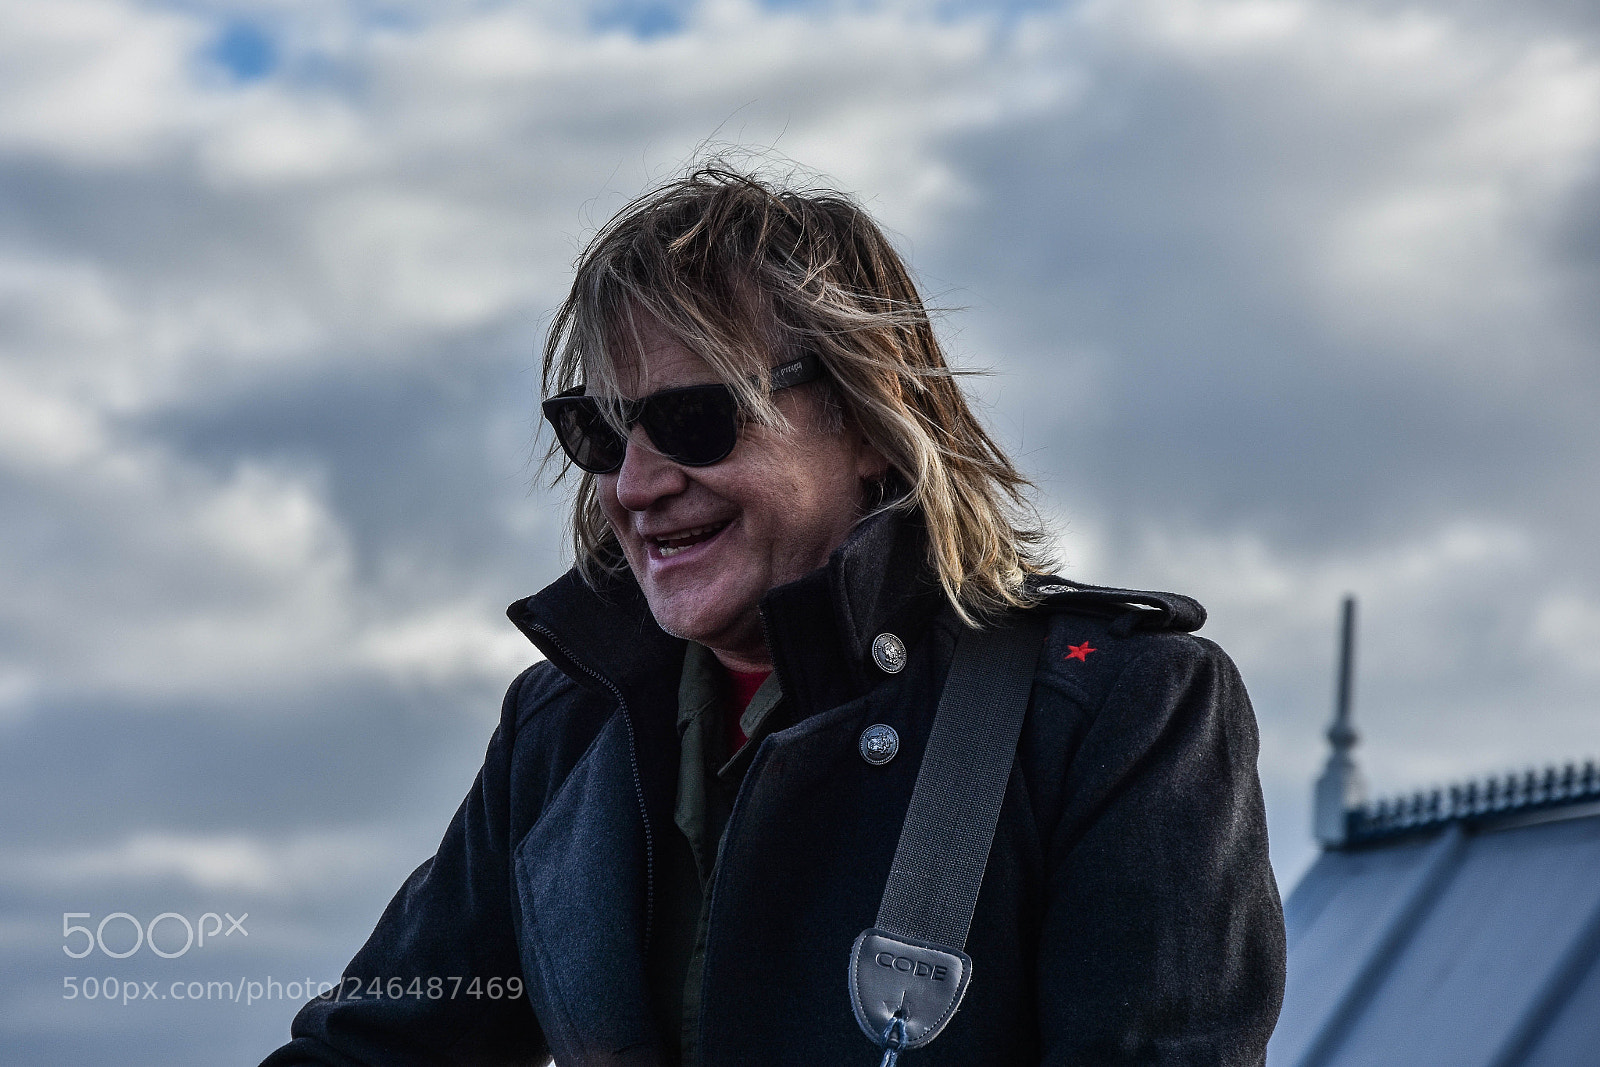 Nikon D7200 sample photo. Mike peters - the photography